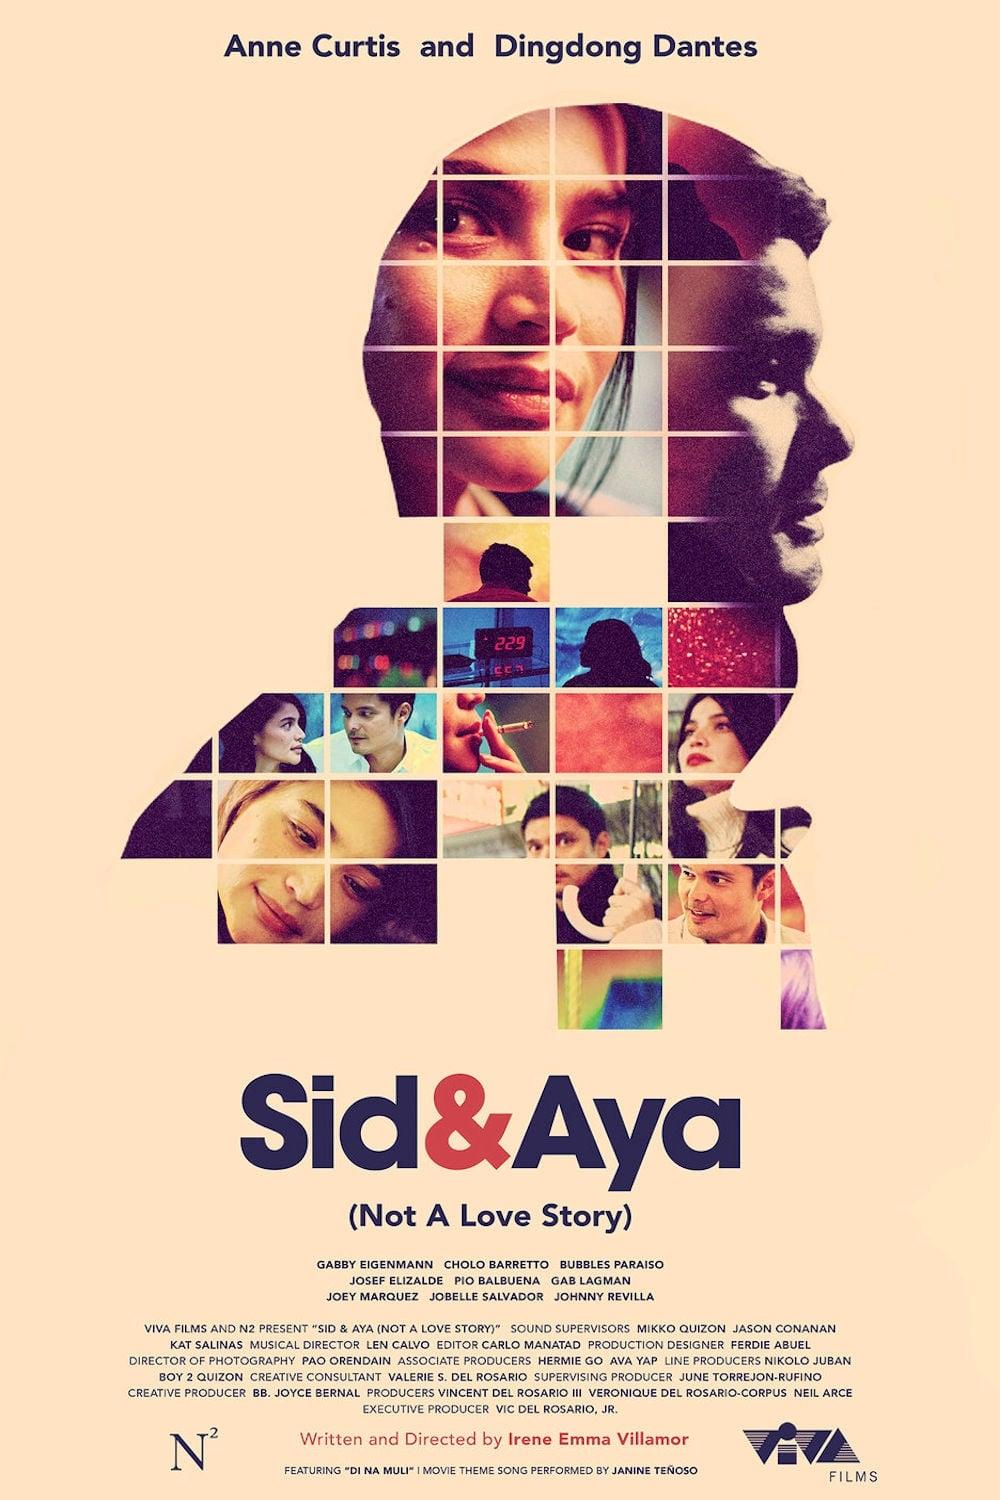 Sid & Aya: Not a Love Story poster